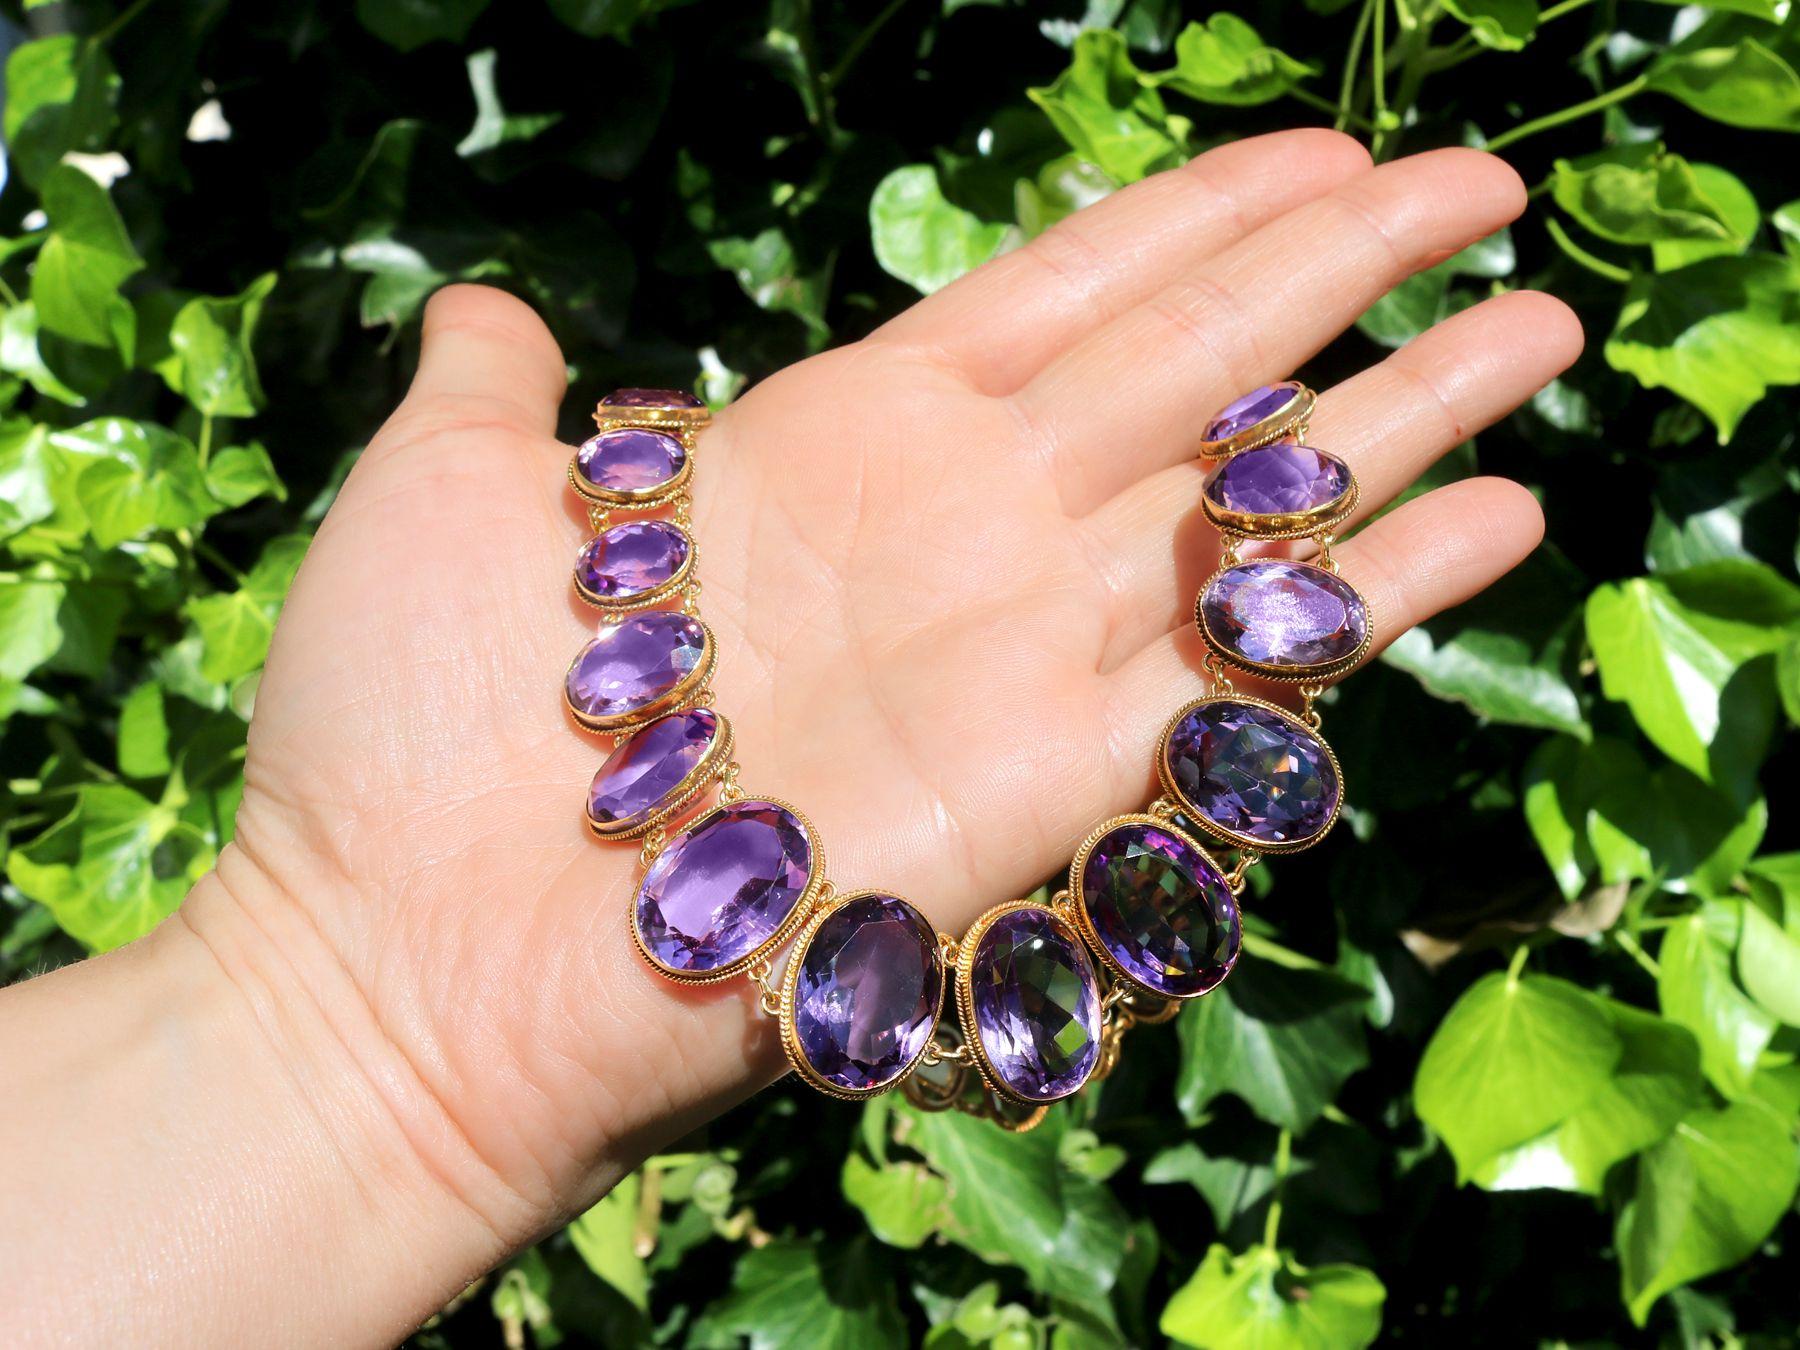 A stunning, impressive antique Victorian 274.91 carat amethyst and 18 karat yellow gold rivière necklace; part of our diverse antique jewelry collections.

This fine and impressive antique amethyst necklace has been crafted in 18k yellow gold.

The